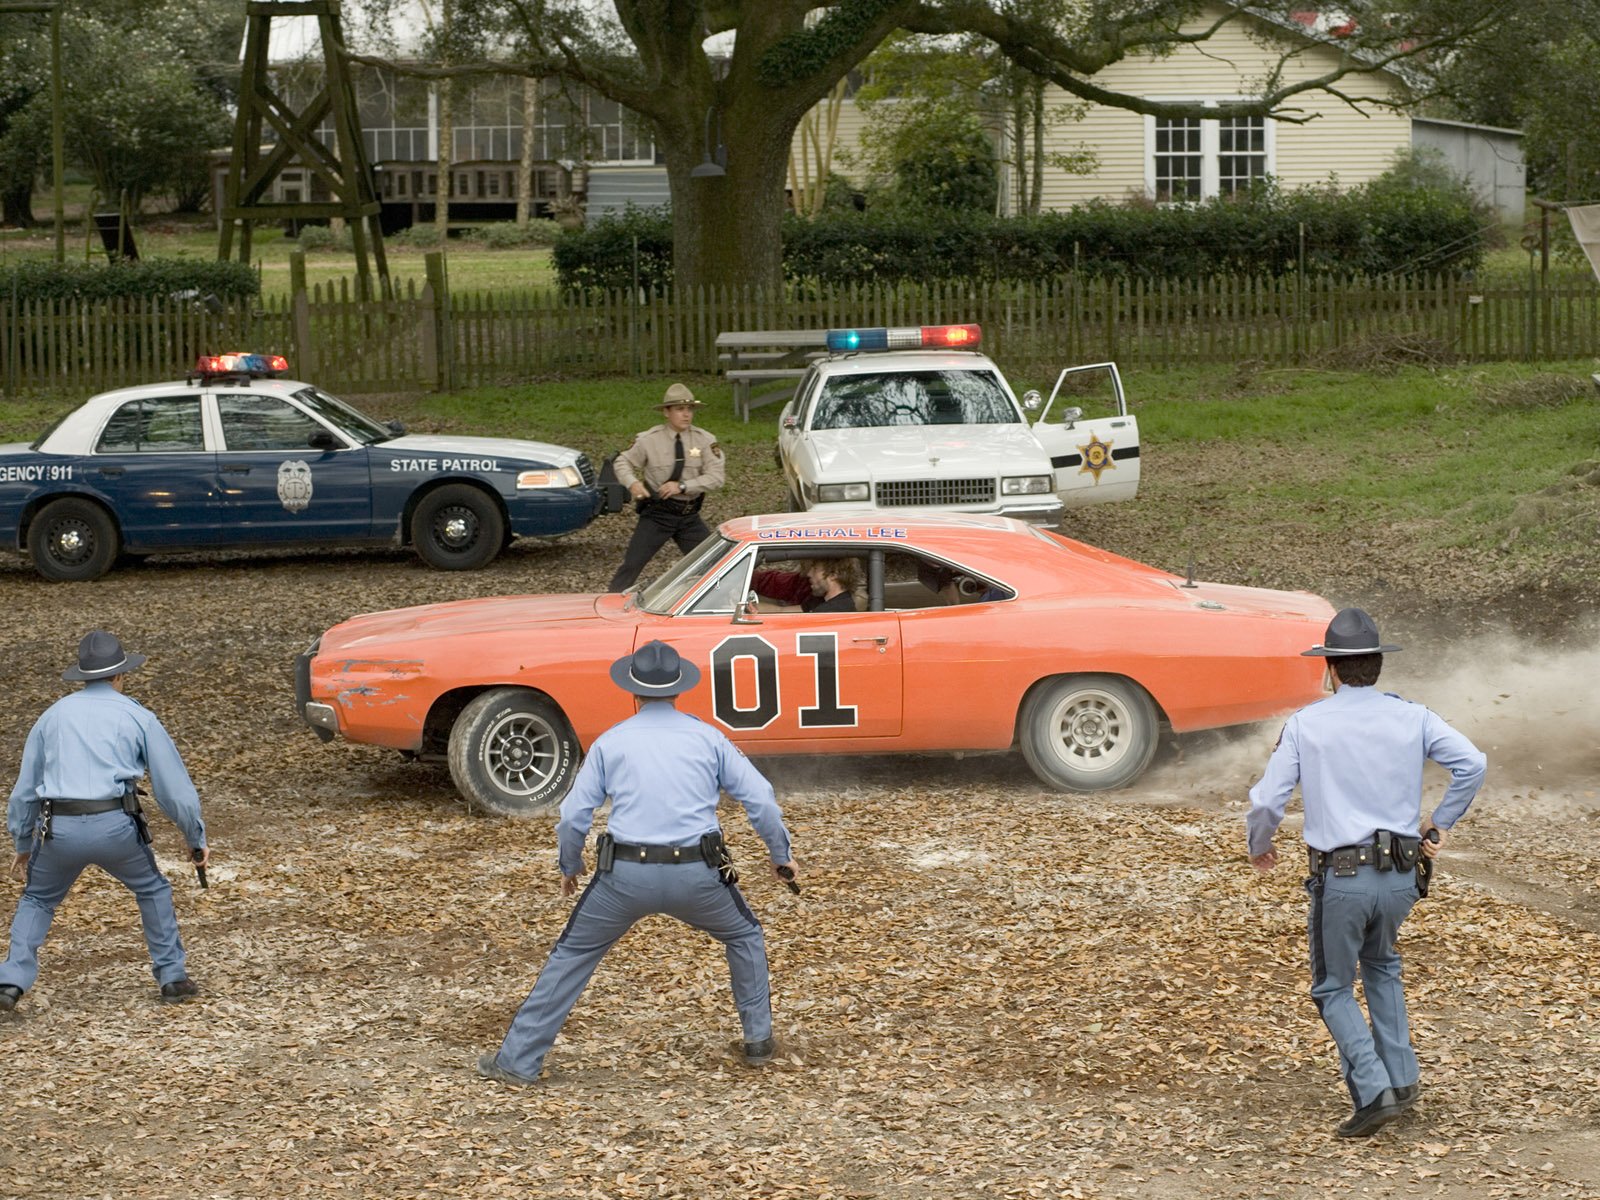 general, Lee, Dukes, Hazzard, Dodge, Charger, Muscle, Hot, Rod, Rods, Television, Series, Poloce Wallpaper